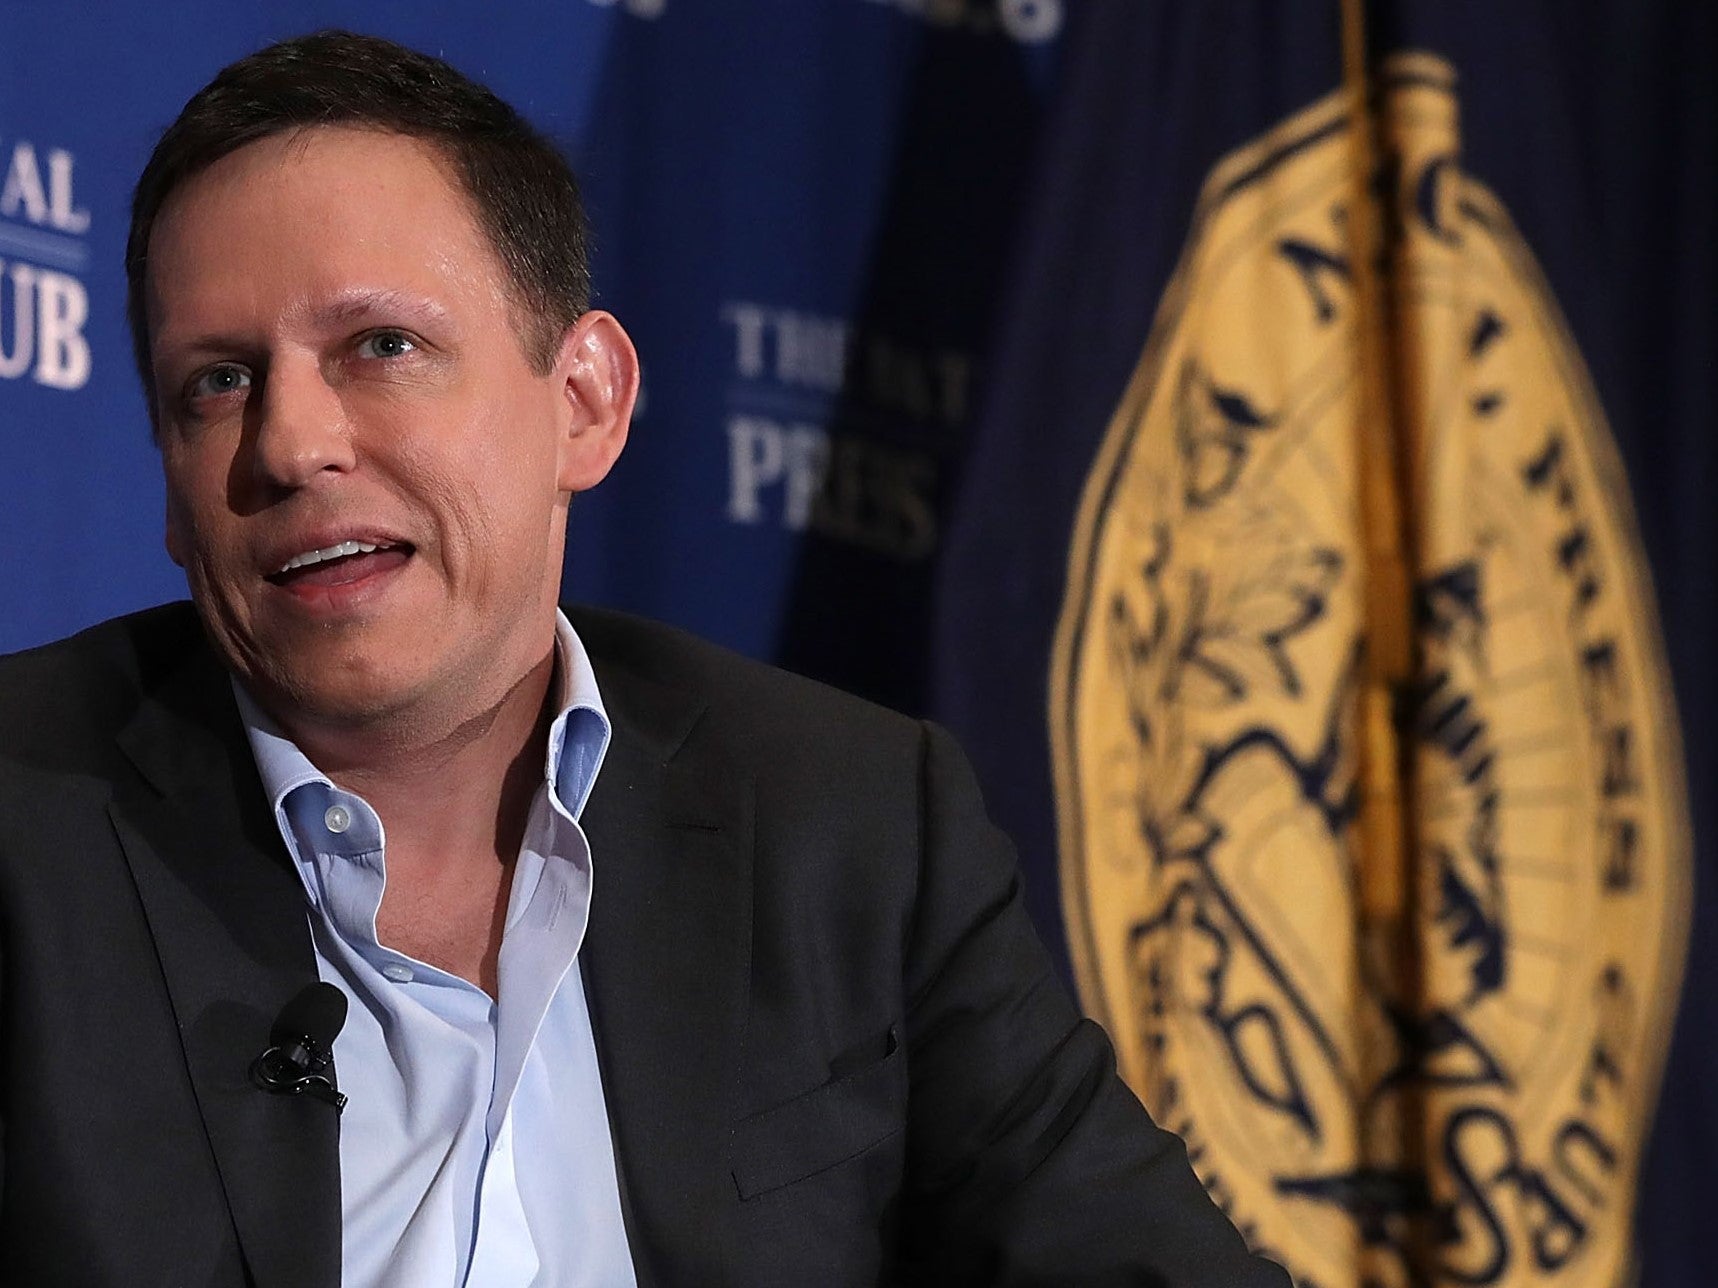 Peter Thiel pictured in at the National Press Club on 31 October, 2016 in Washington, DC